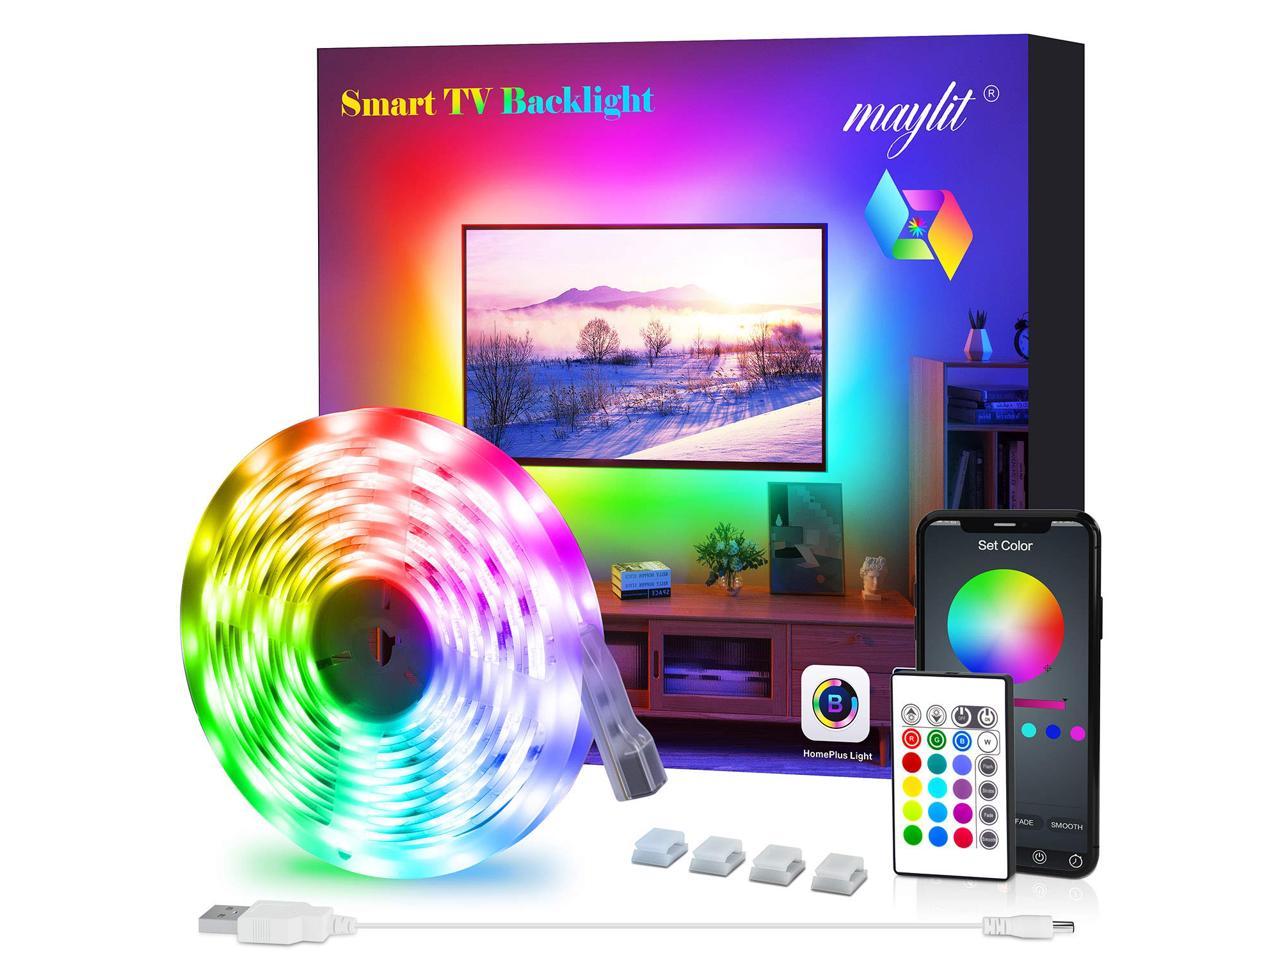 LED TV Backlight Bias Lighting Kits for HDTV Remote Control USB Powered RGB Multi Color Led Light Strip Home Theater Accent Lighting Kits 4 Strips in 1 Set 7 Colors 